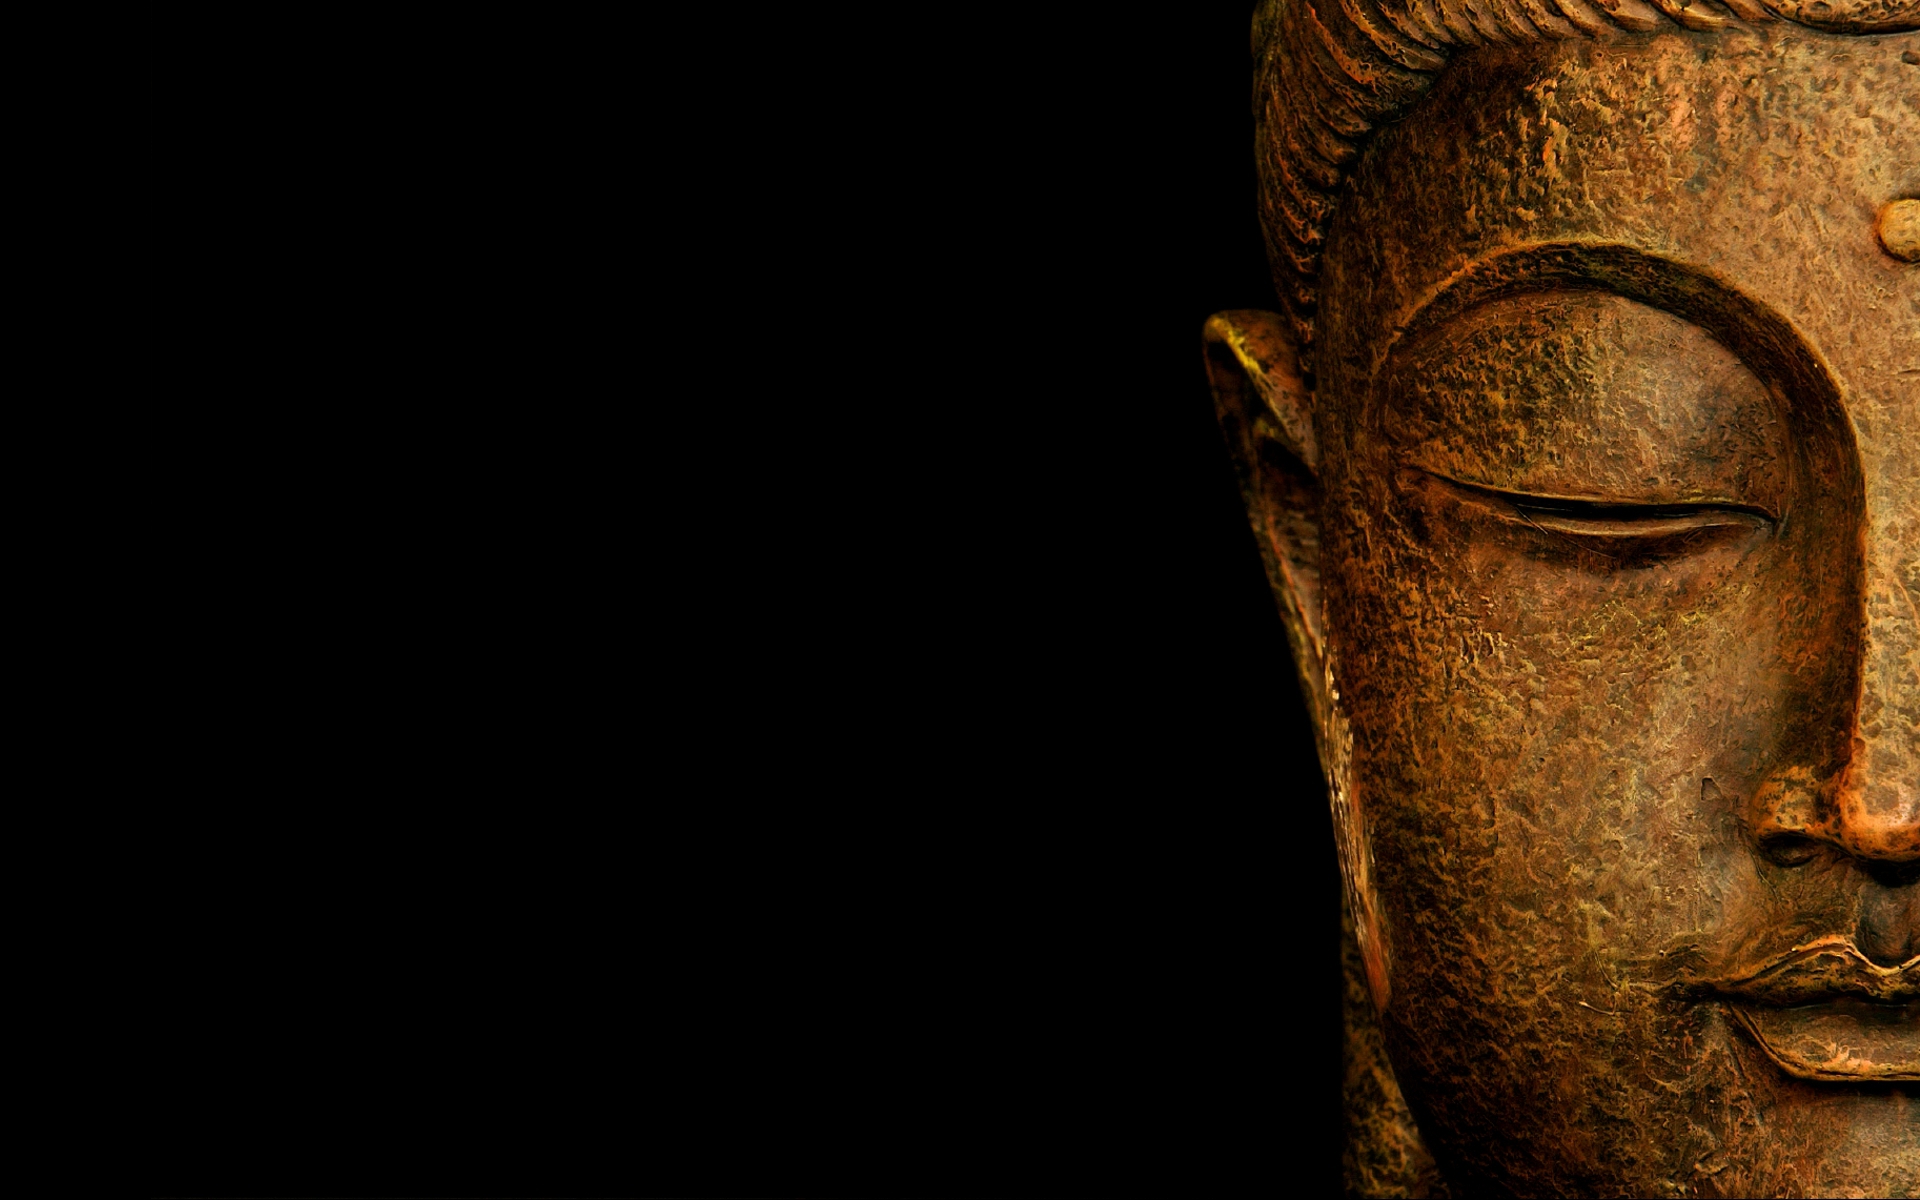 Gallery For Gt Buddha Face Wallpaper